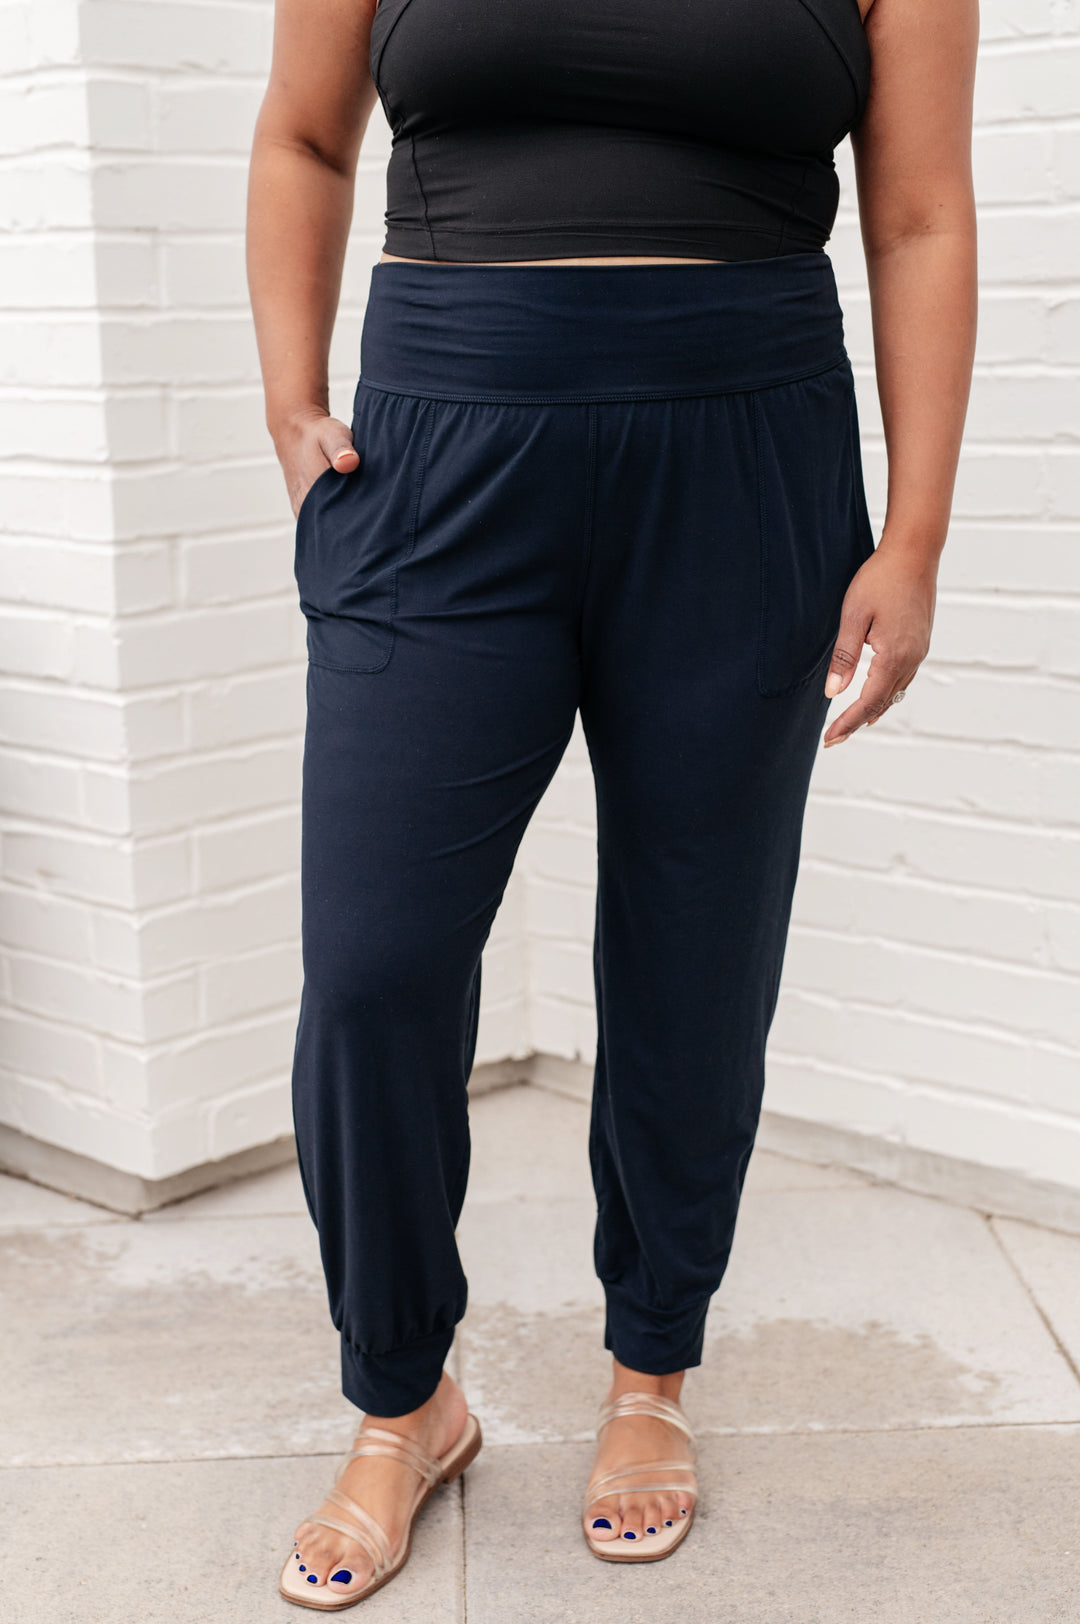 Always Accelerating Joggers in Nocturnal Navy-Athleisure-Inspired by Justeen-Women's Clothing Boutique in Chicago, Illinois